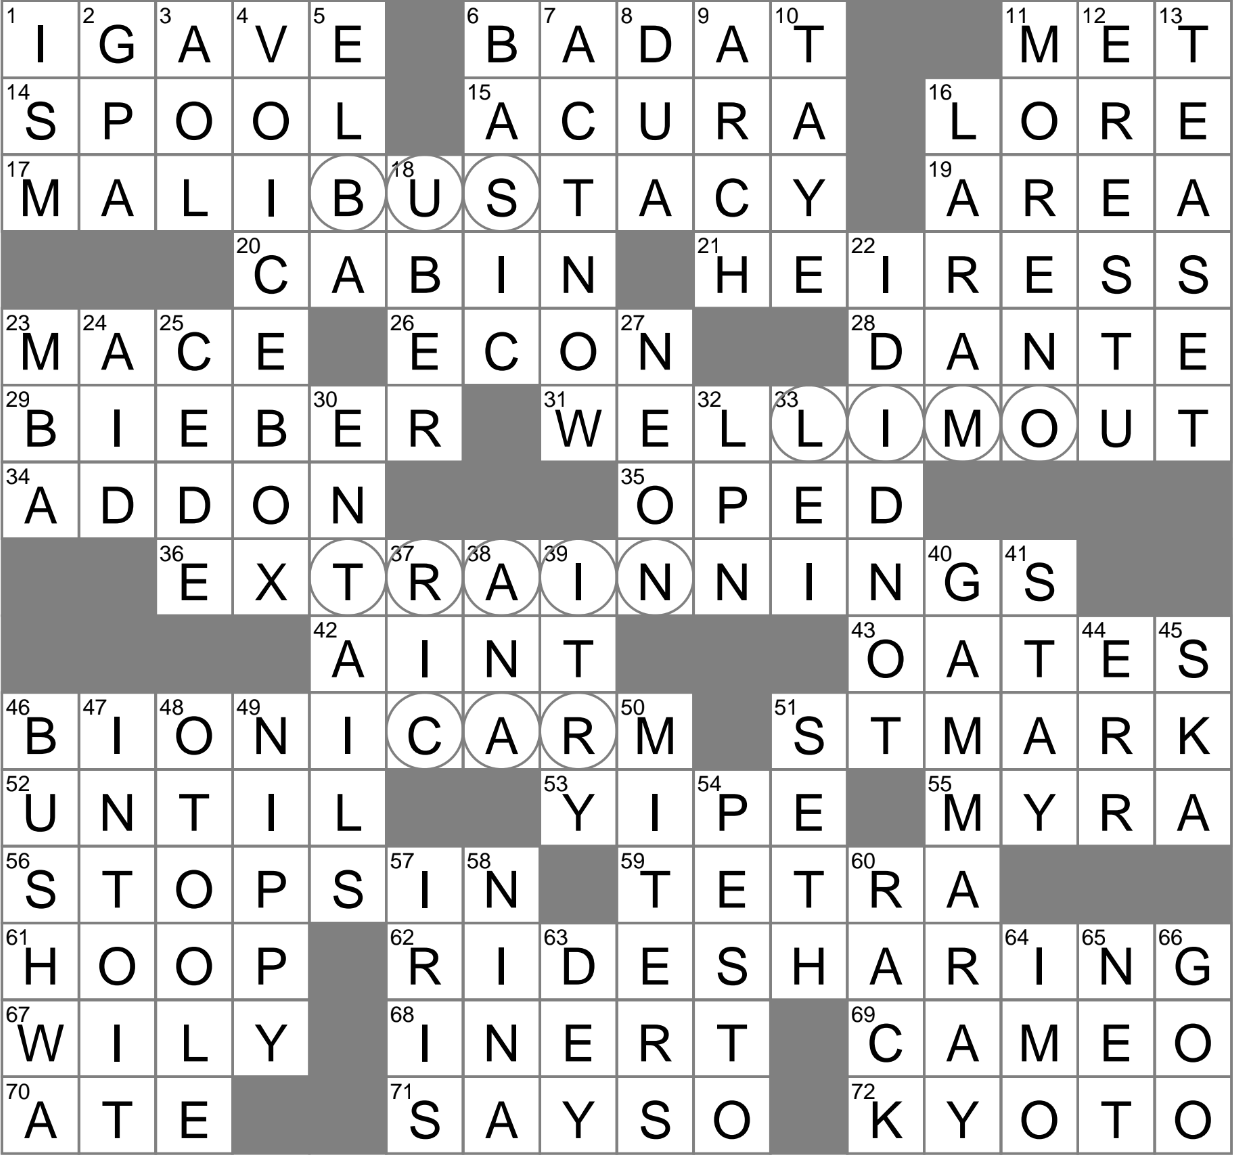 Used as Campaign Talking Point Crossword Puzzle